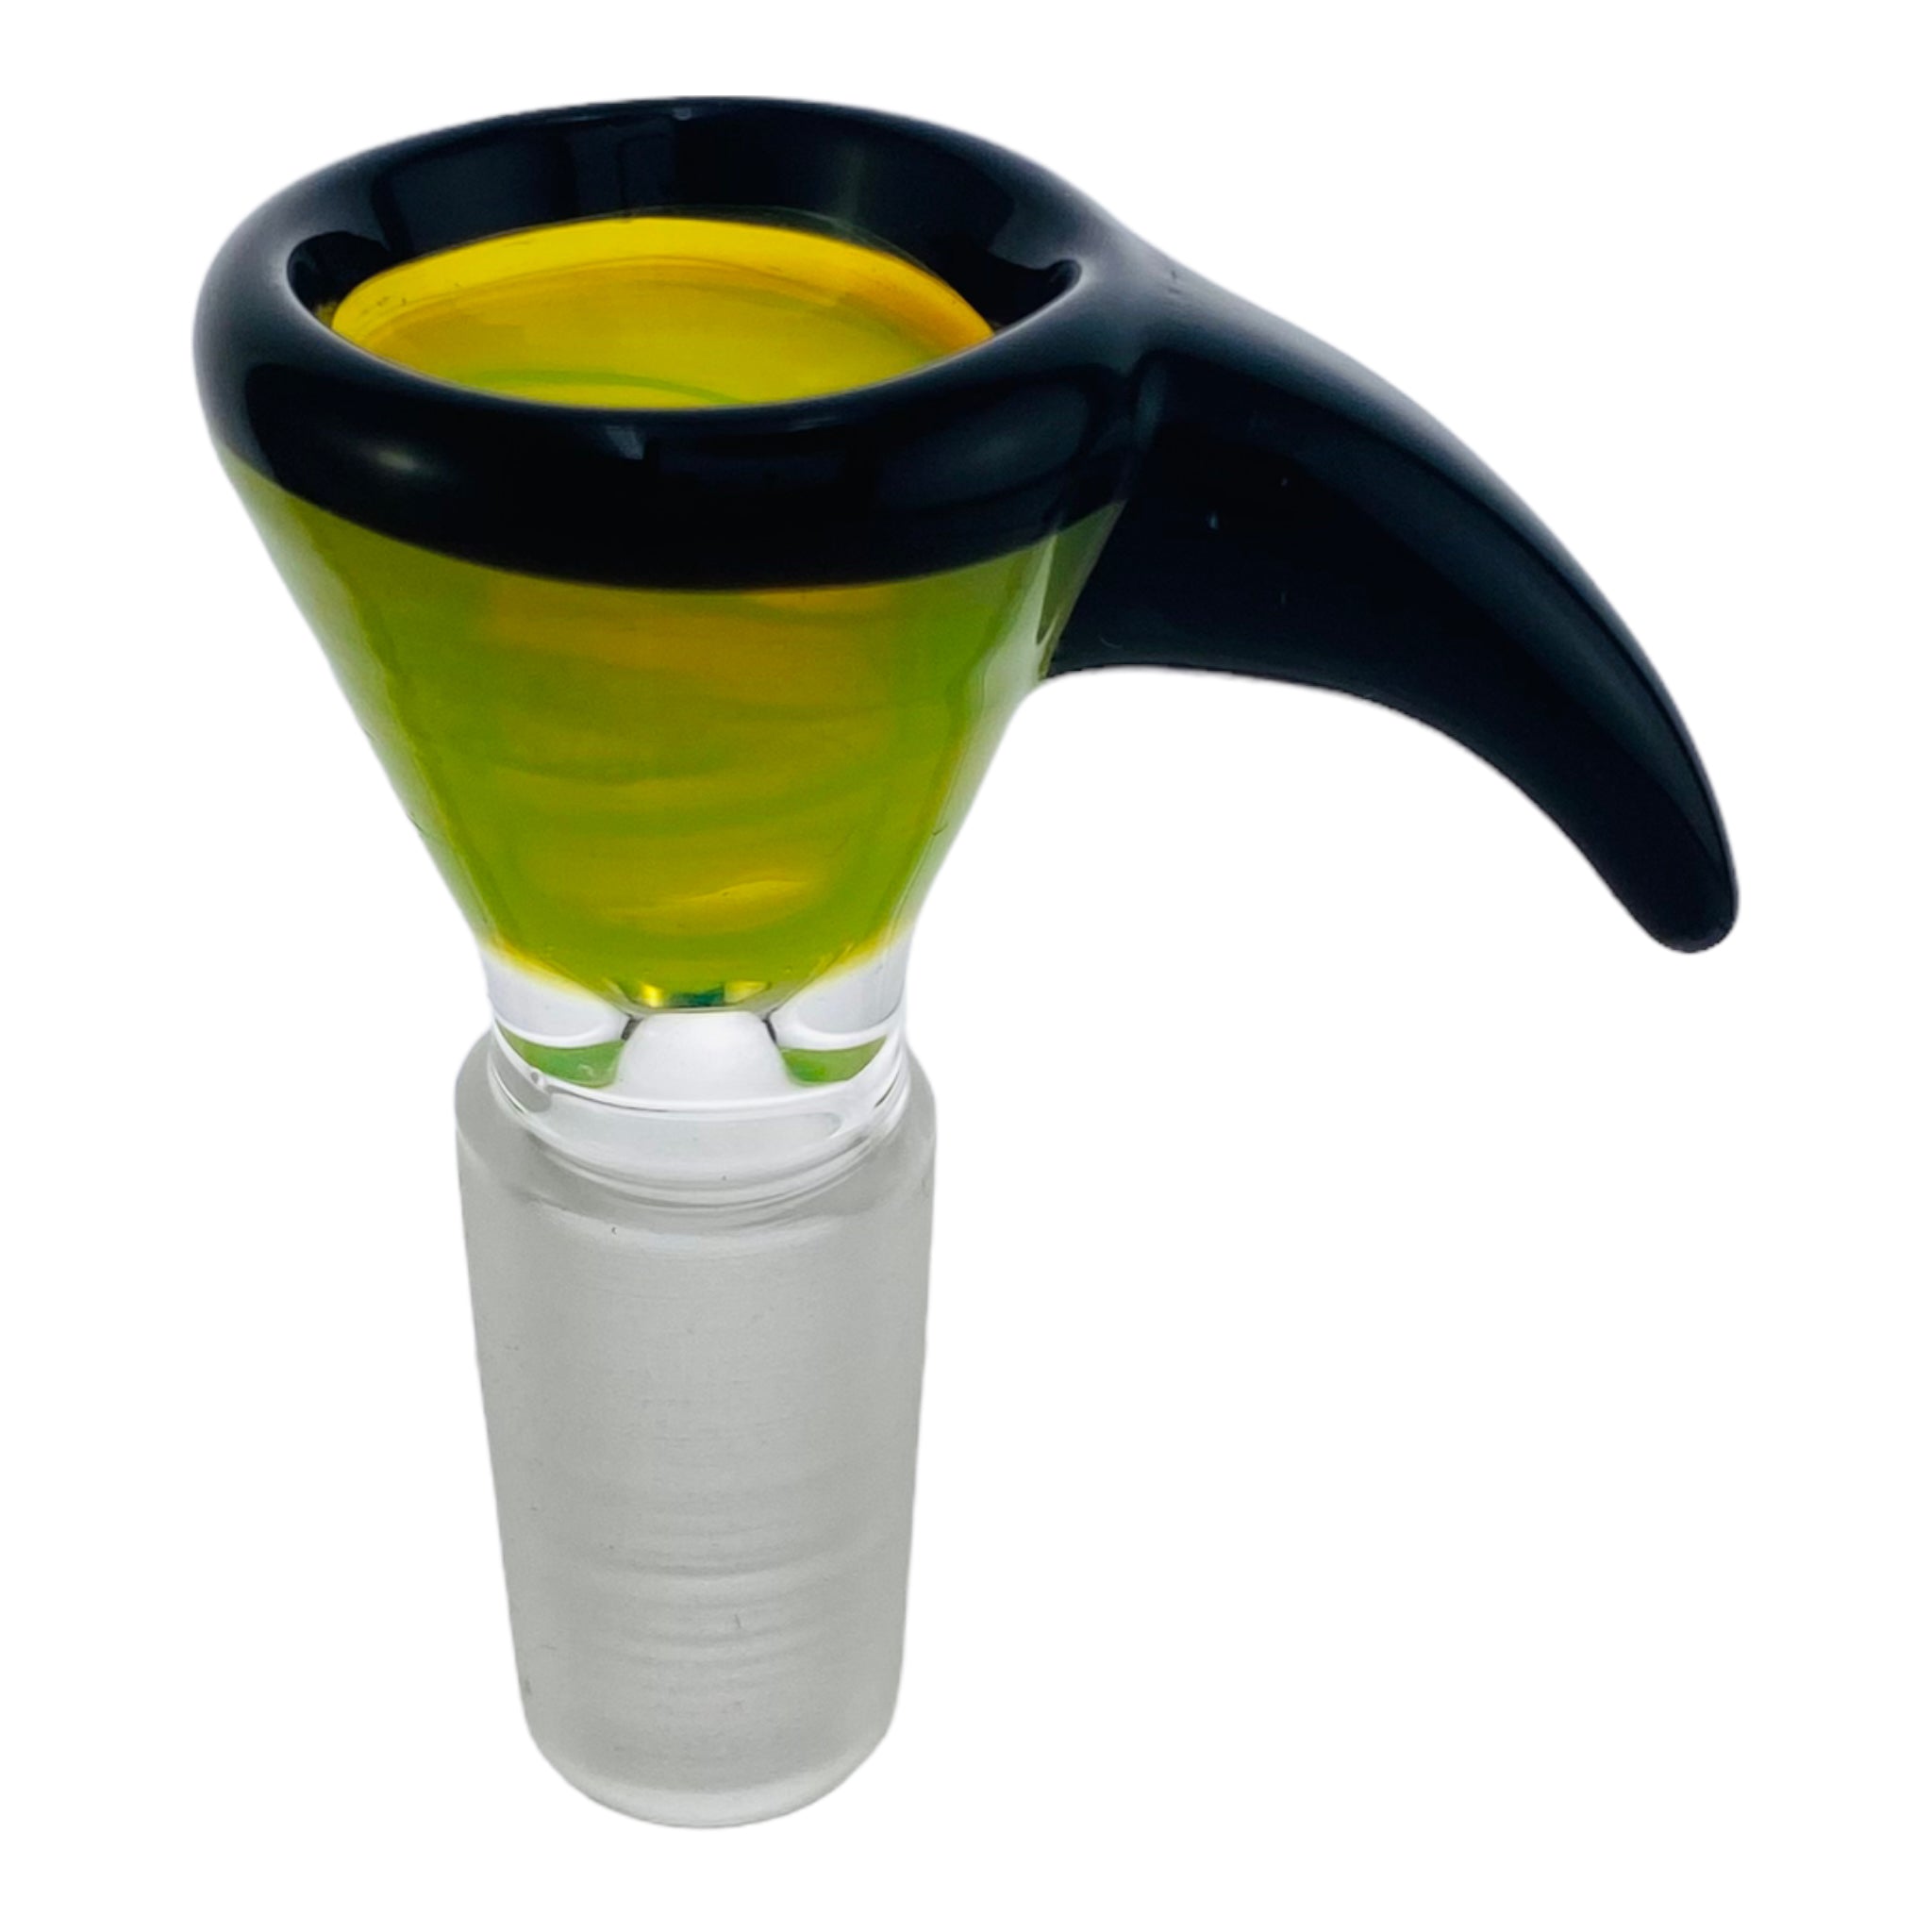 14mm Flower Bowl - Green Funnel With Black Handle Bong Bowl Piece